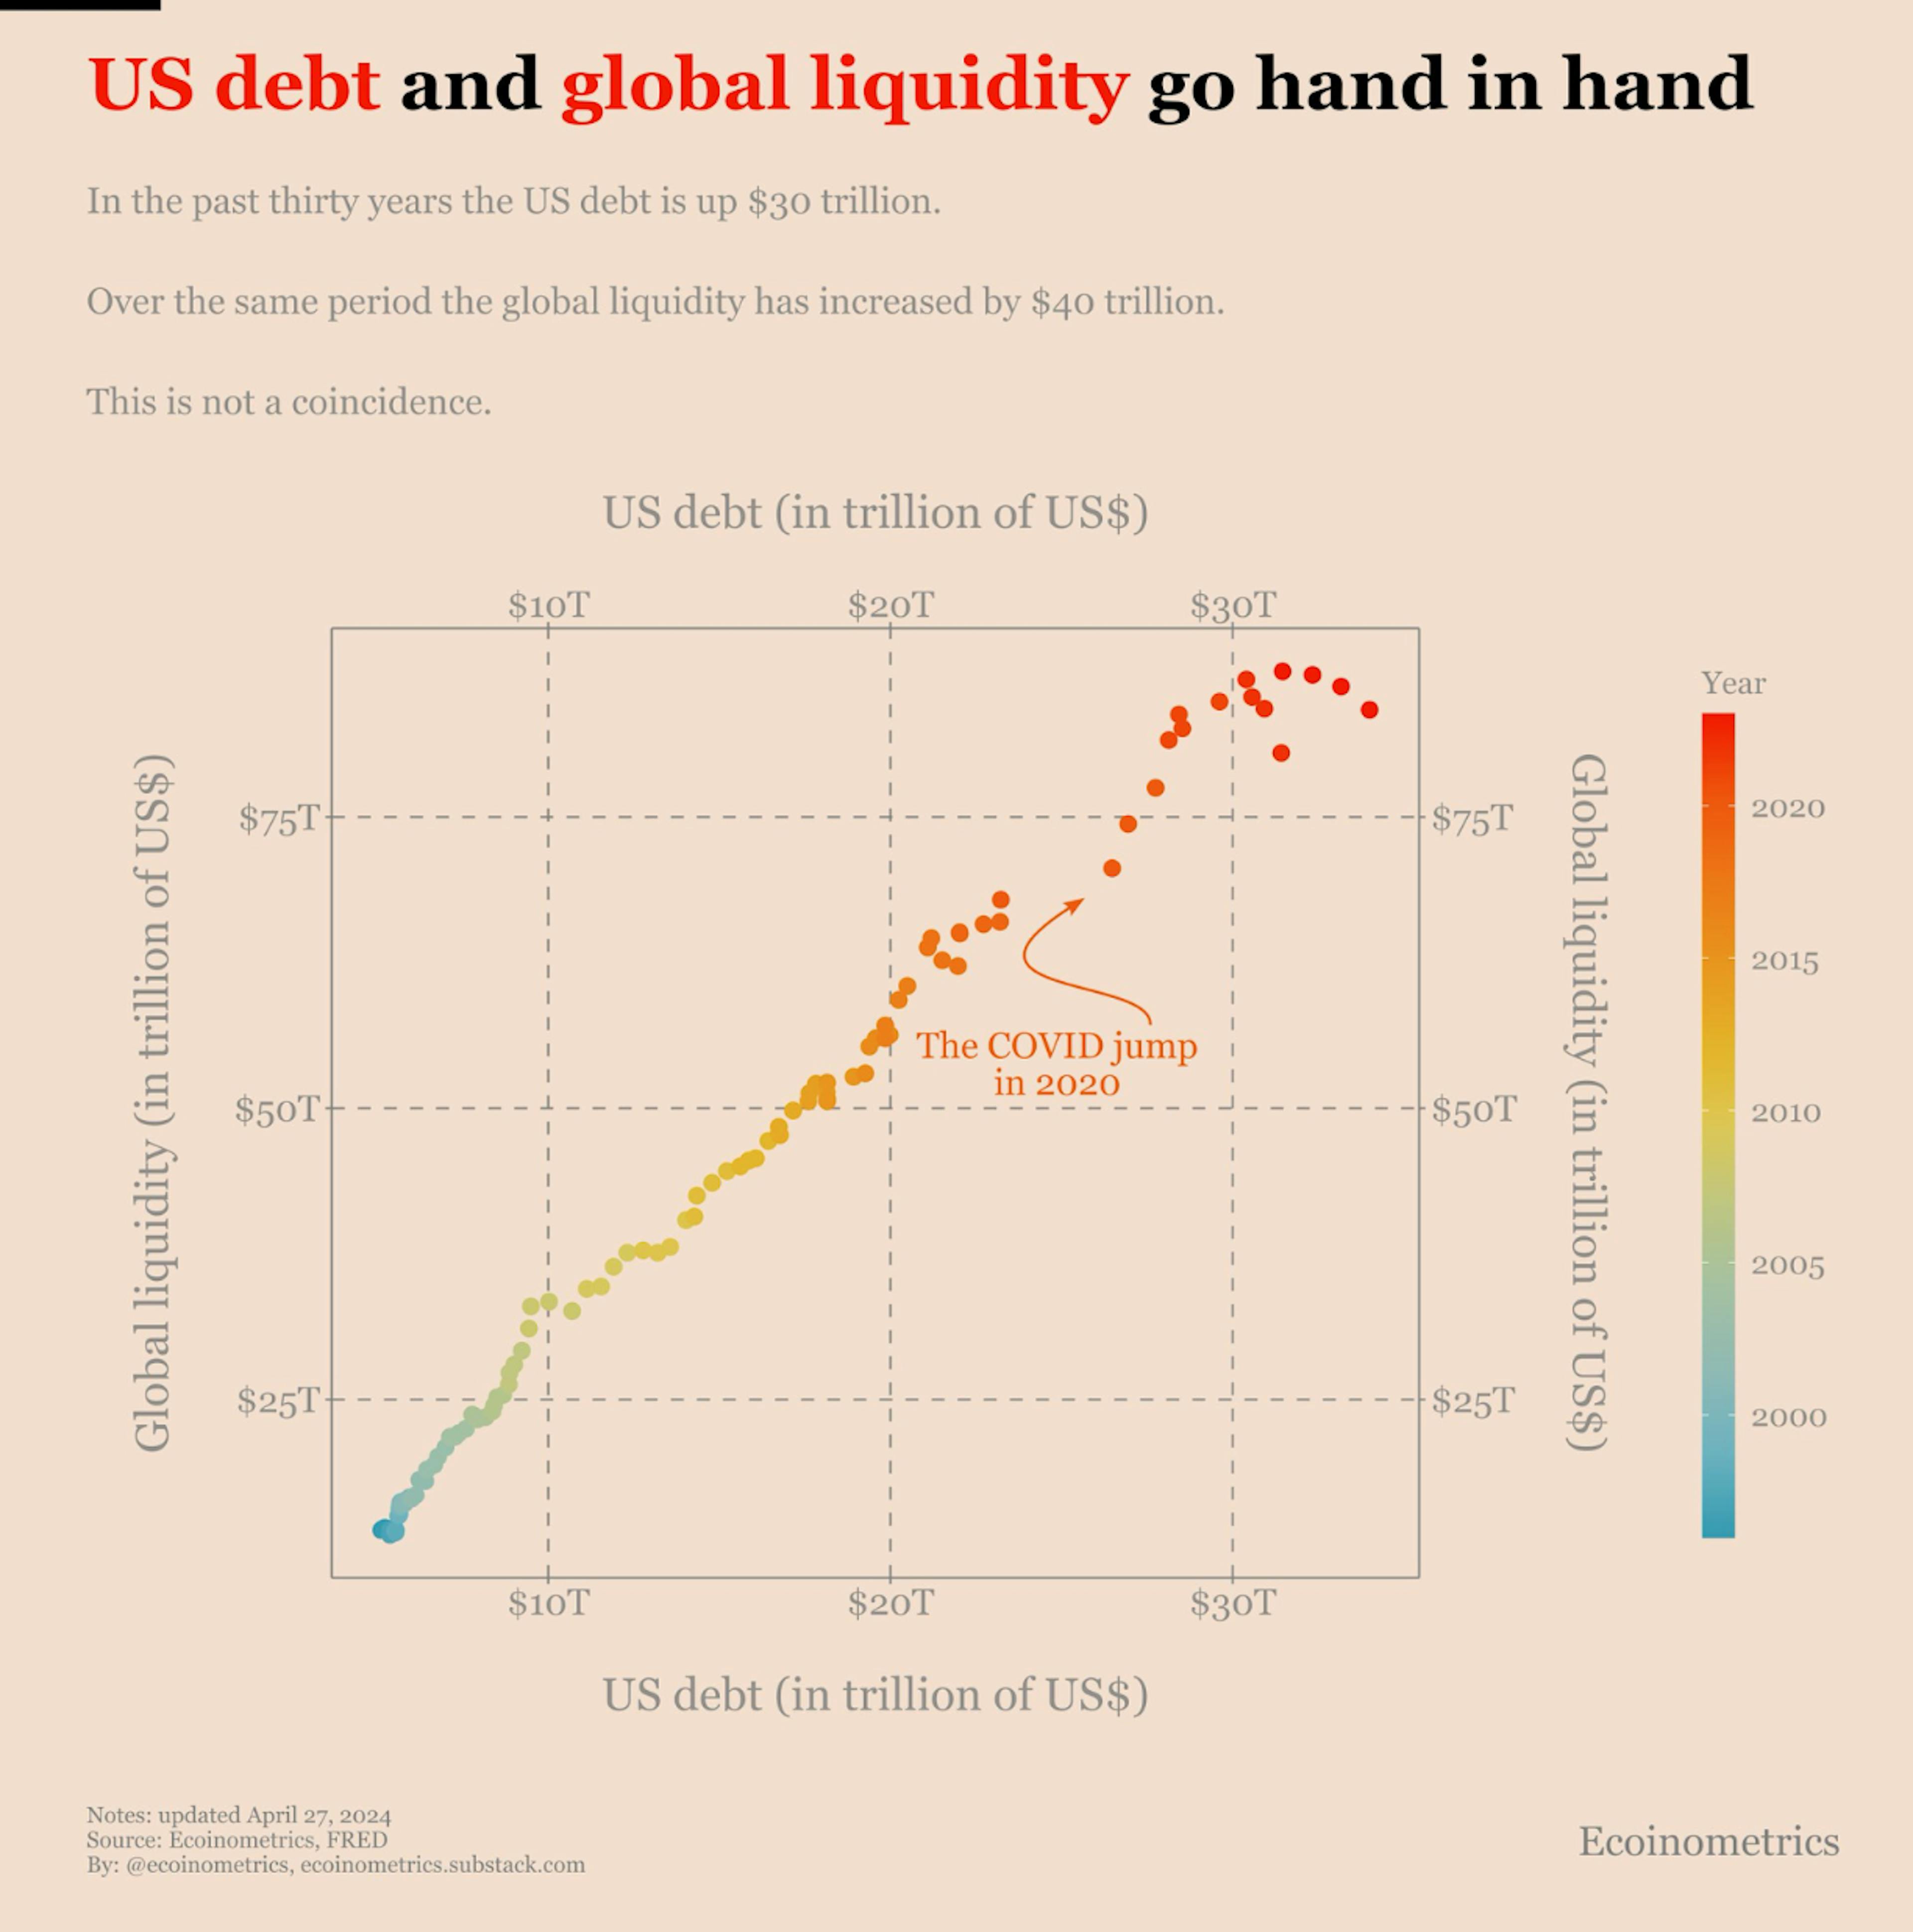 US debt and global liquidity go hand in hand